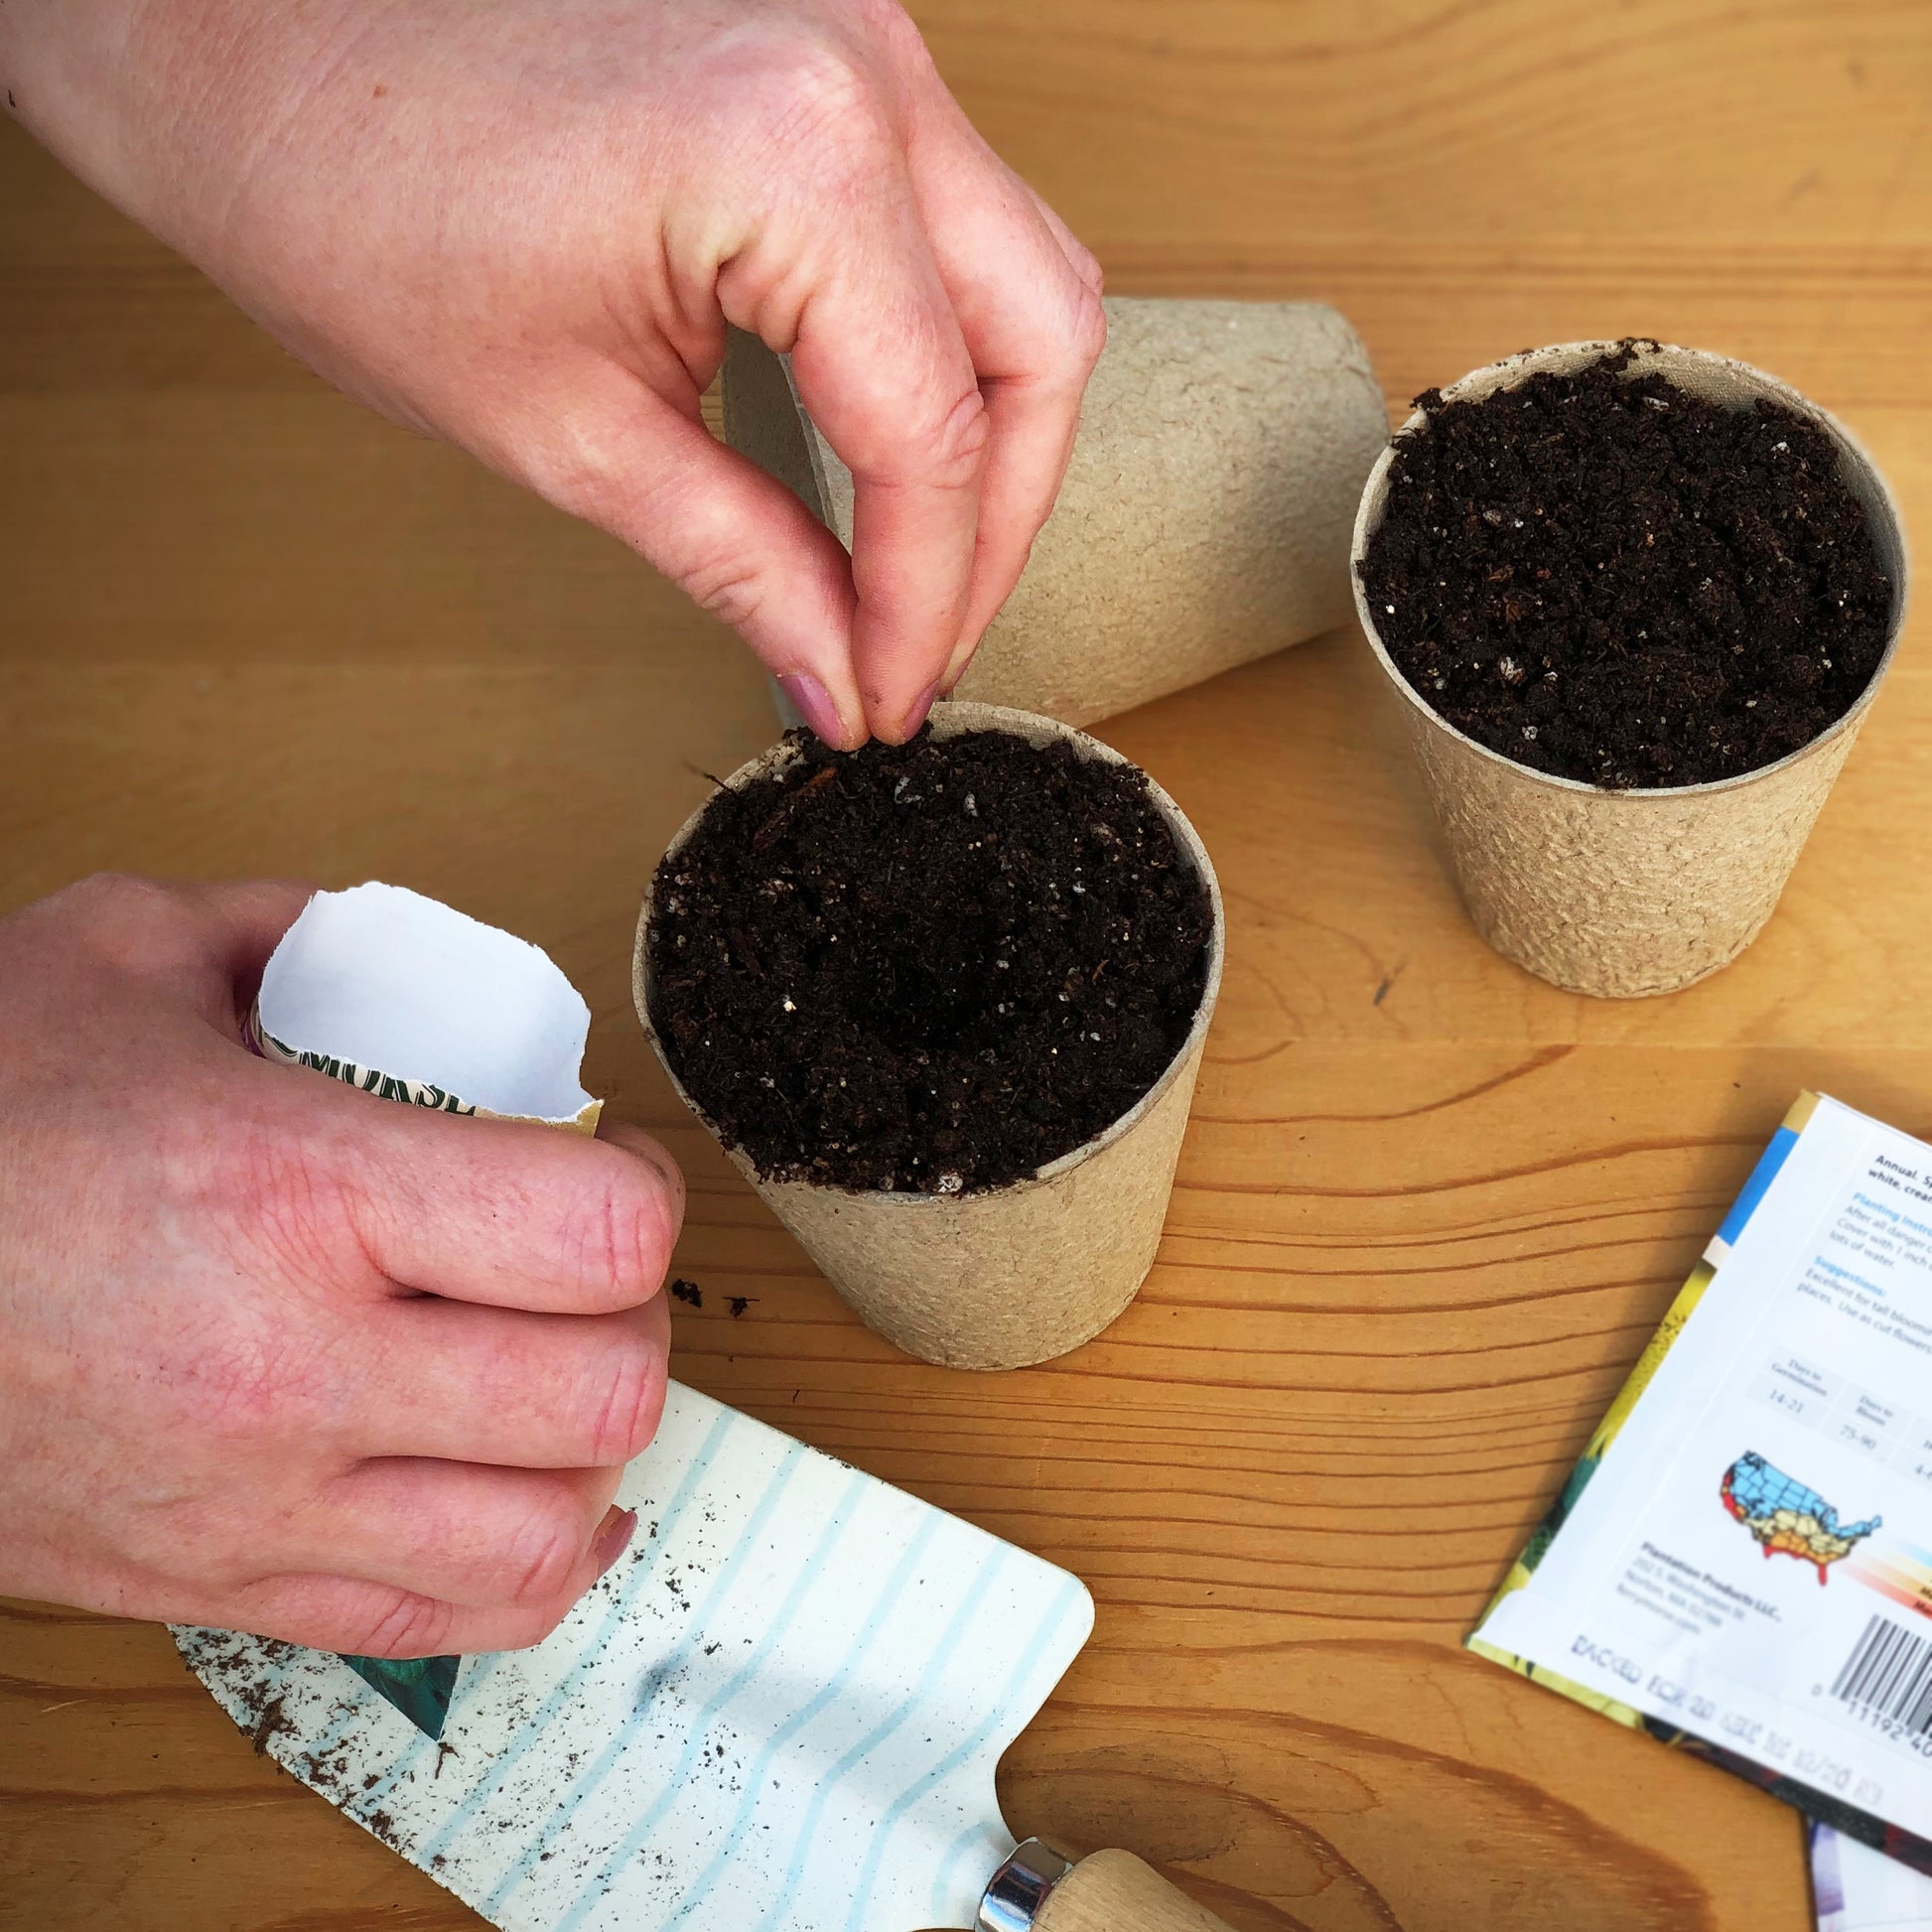 Start Amish Pie Heirloom Pumpkin seeds in biodegradable peat pots filled with sowing mix.